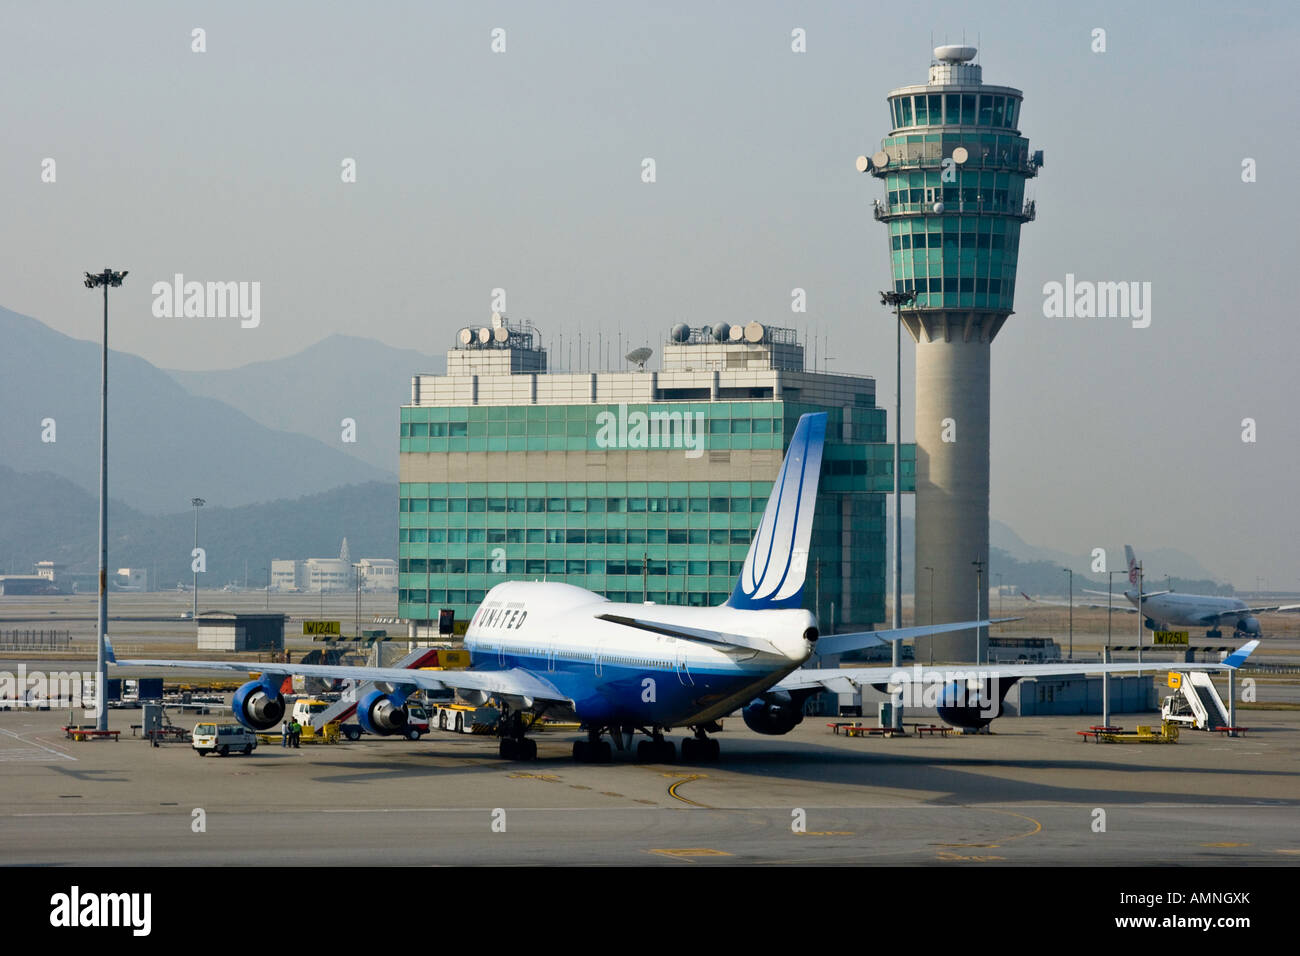 United Airline Commercial Airplane and Conning Tower at HKG Hong Kong International Airport Stock Photo